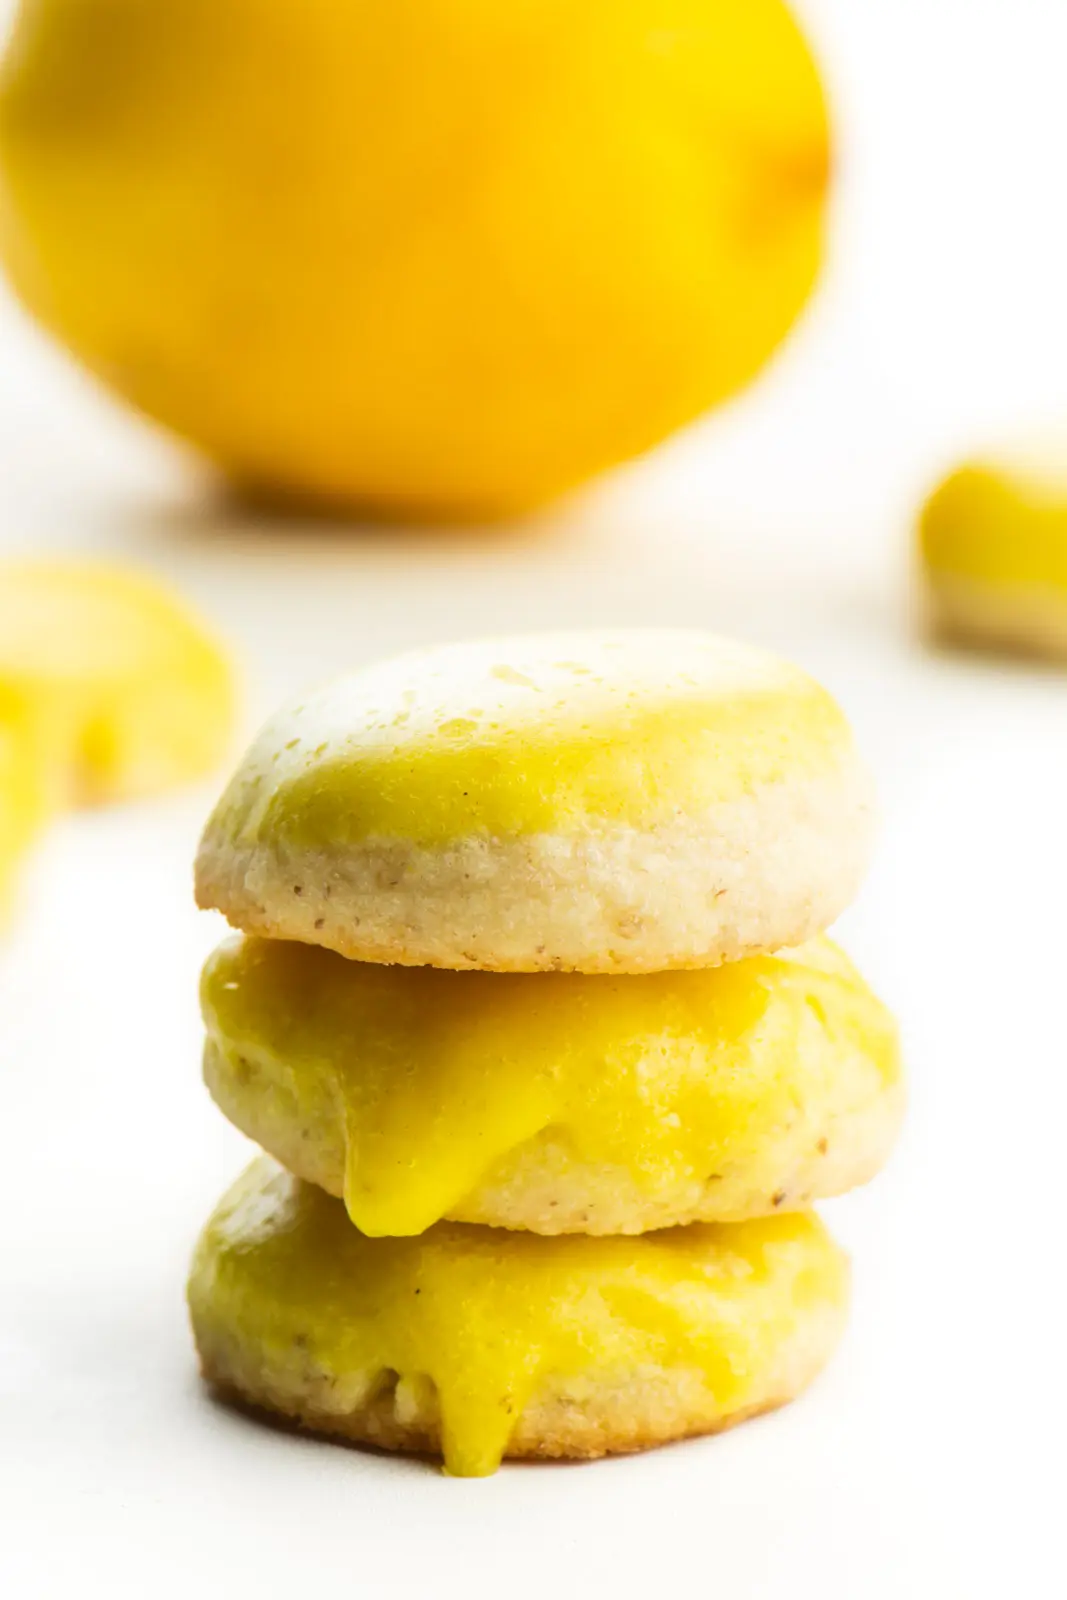 The vegan lemon cookies are stacked on top of each other with more cookies behind it and a lemon.